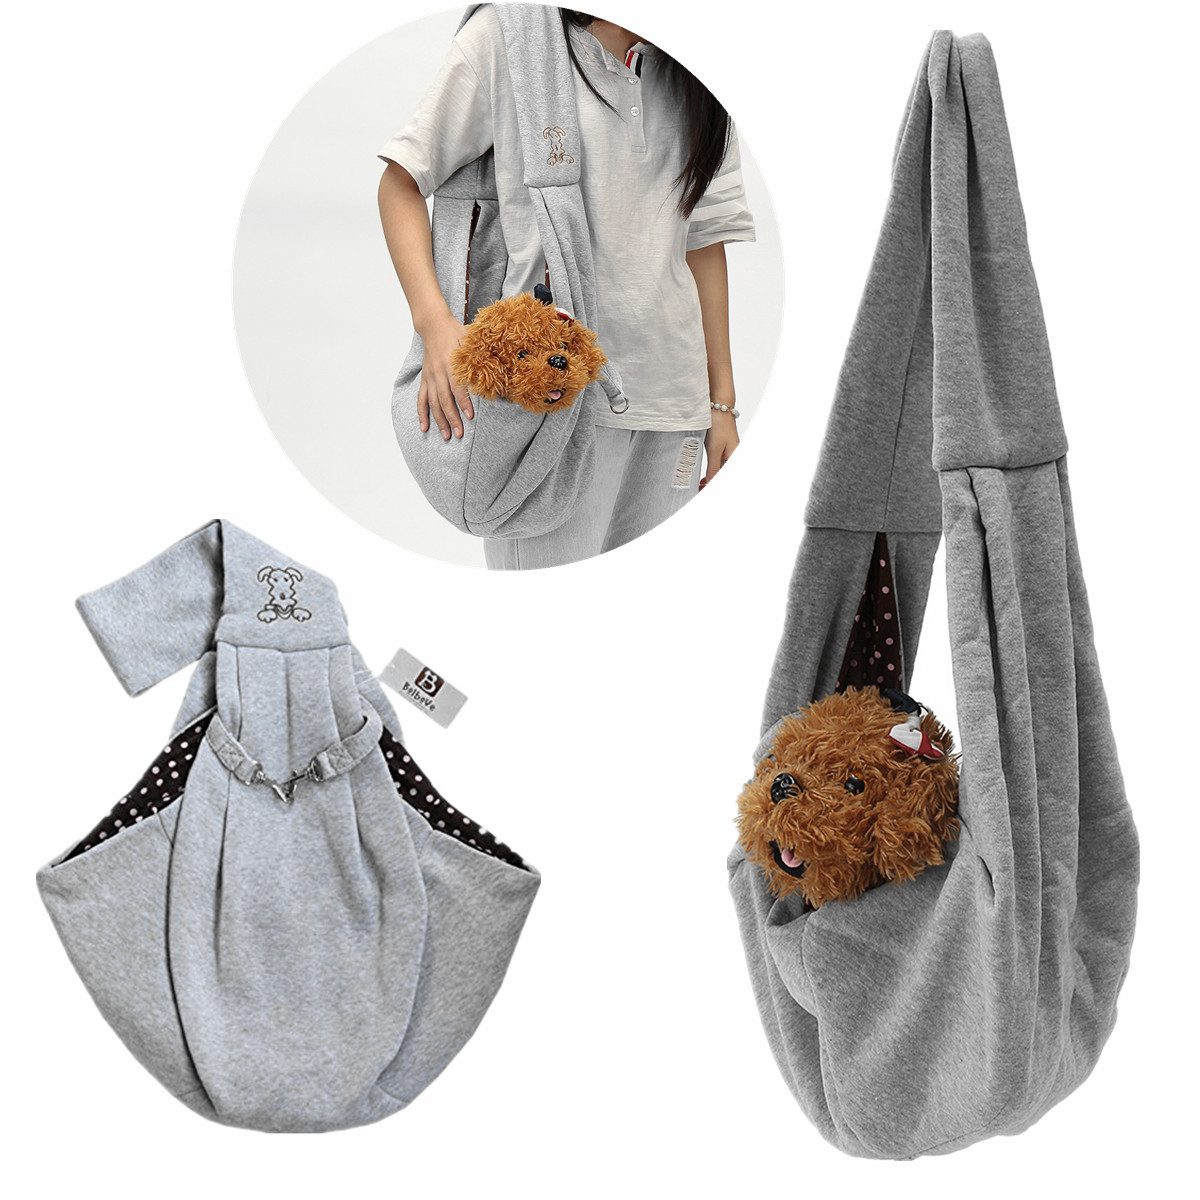 Reversible-Small-Dog-Cat-Sling-Carrier-Bag-Travel-Double-Sided-Pouch-Shoulder-Carry-Handbag-1164286